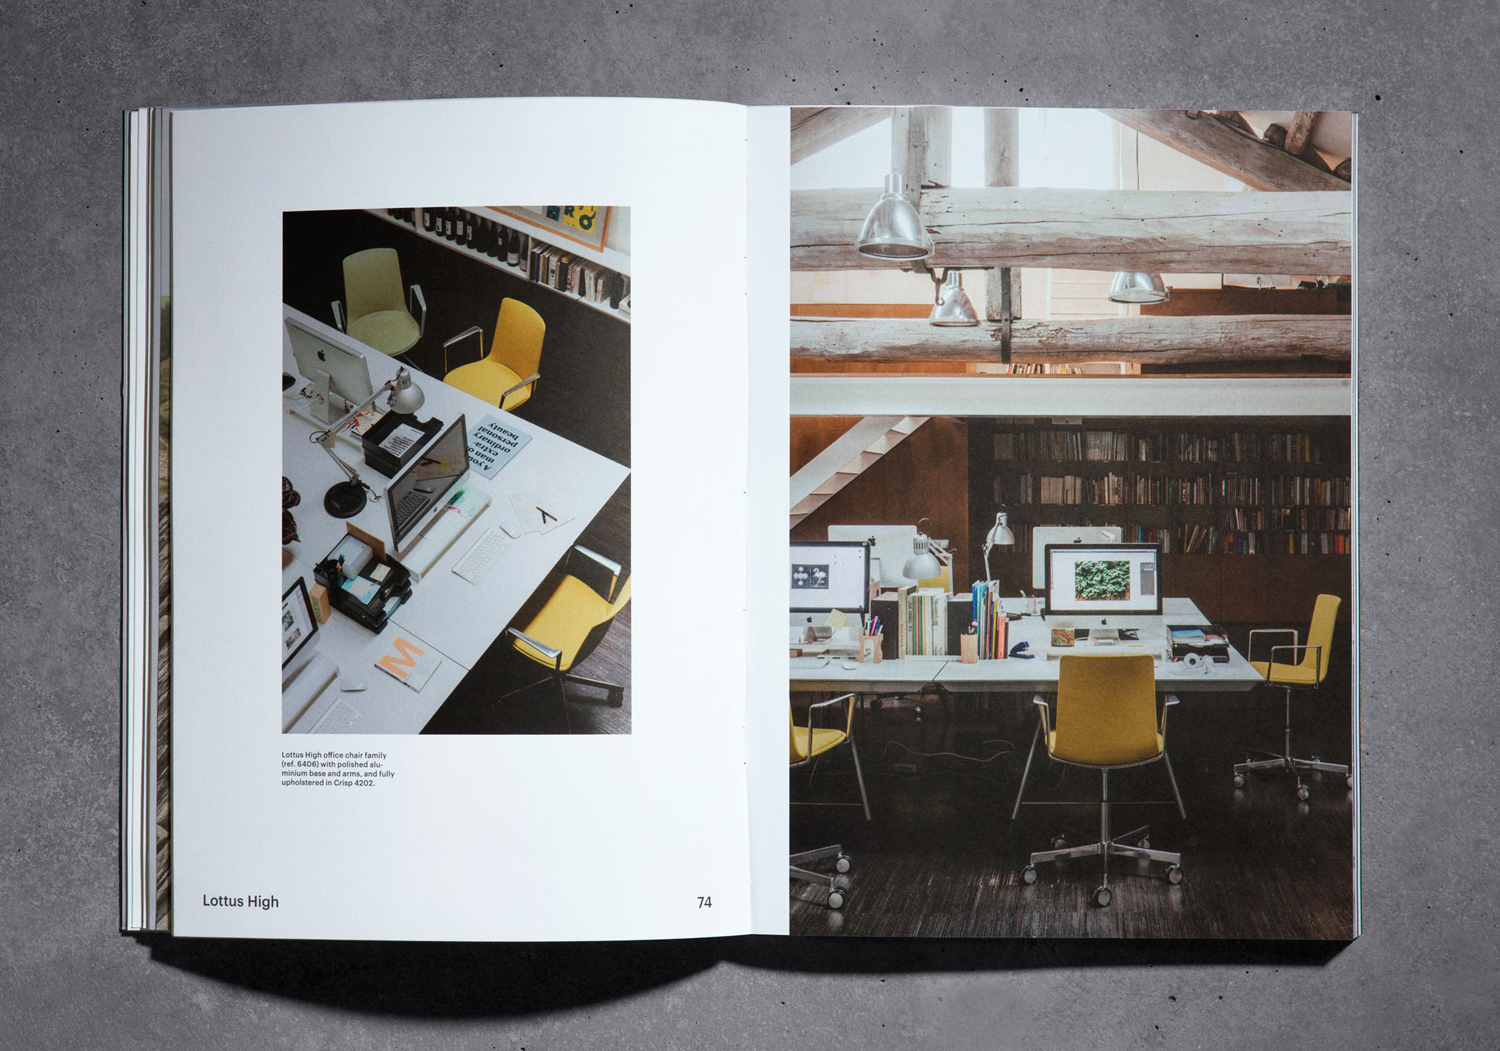 Catalogue for furniture design and manufacturing business Enea designed by Clase bcn 